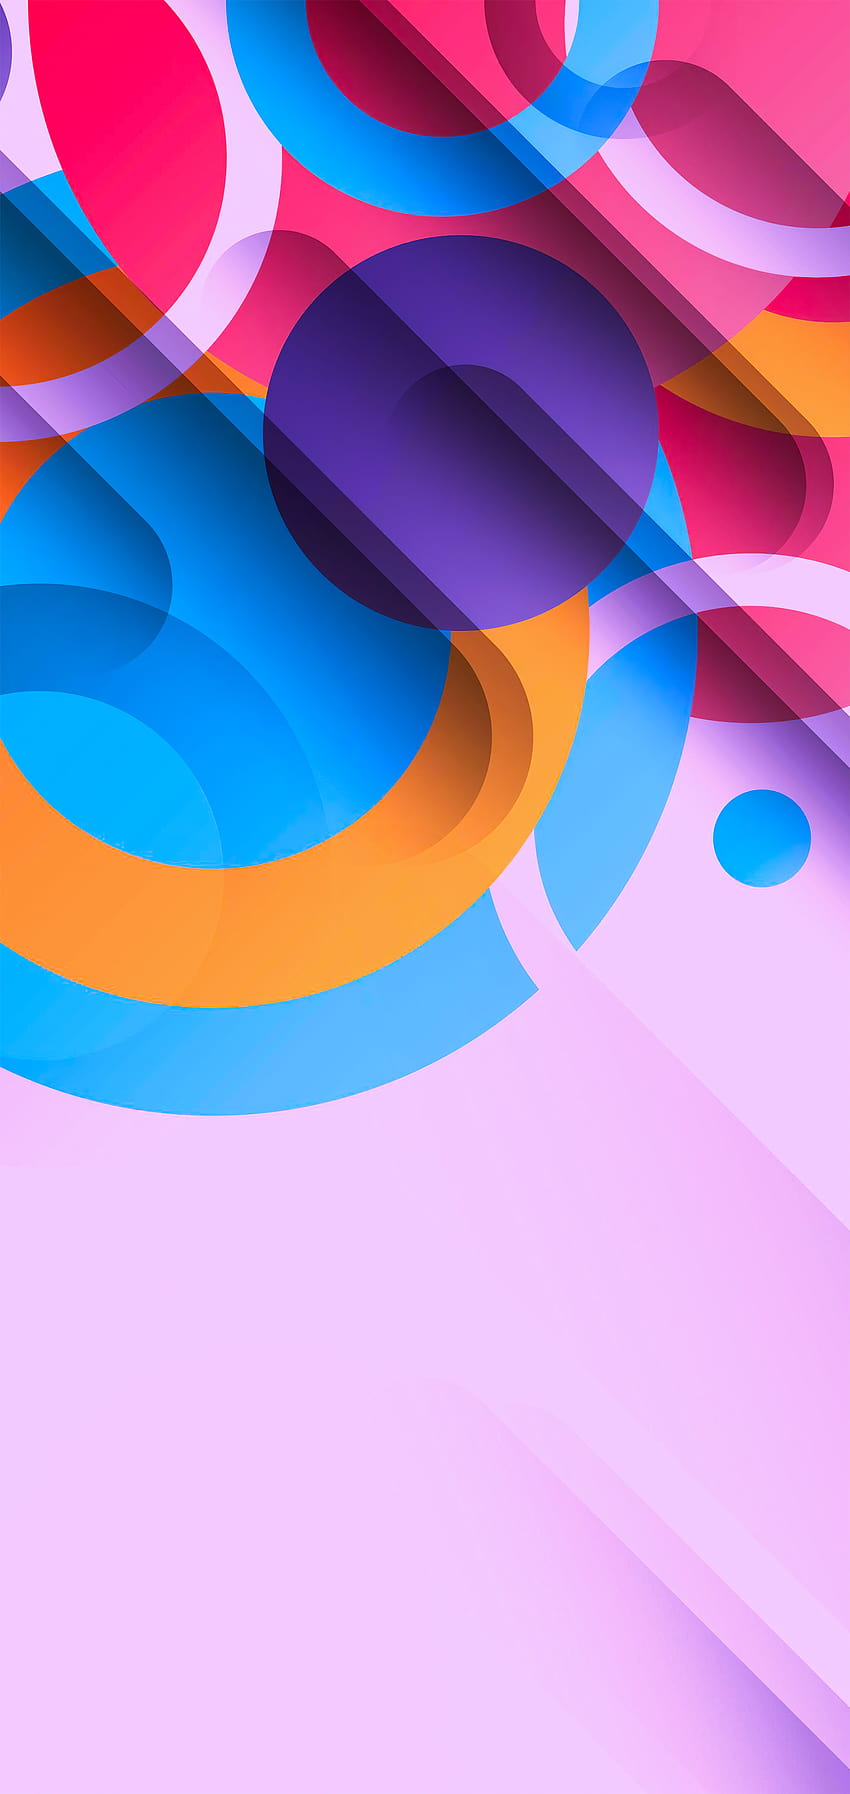 Abstract with geometric colors and shapes for iPhone, colorful geometric shapes pattern HD phone wallpaper